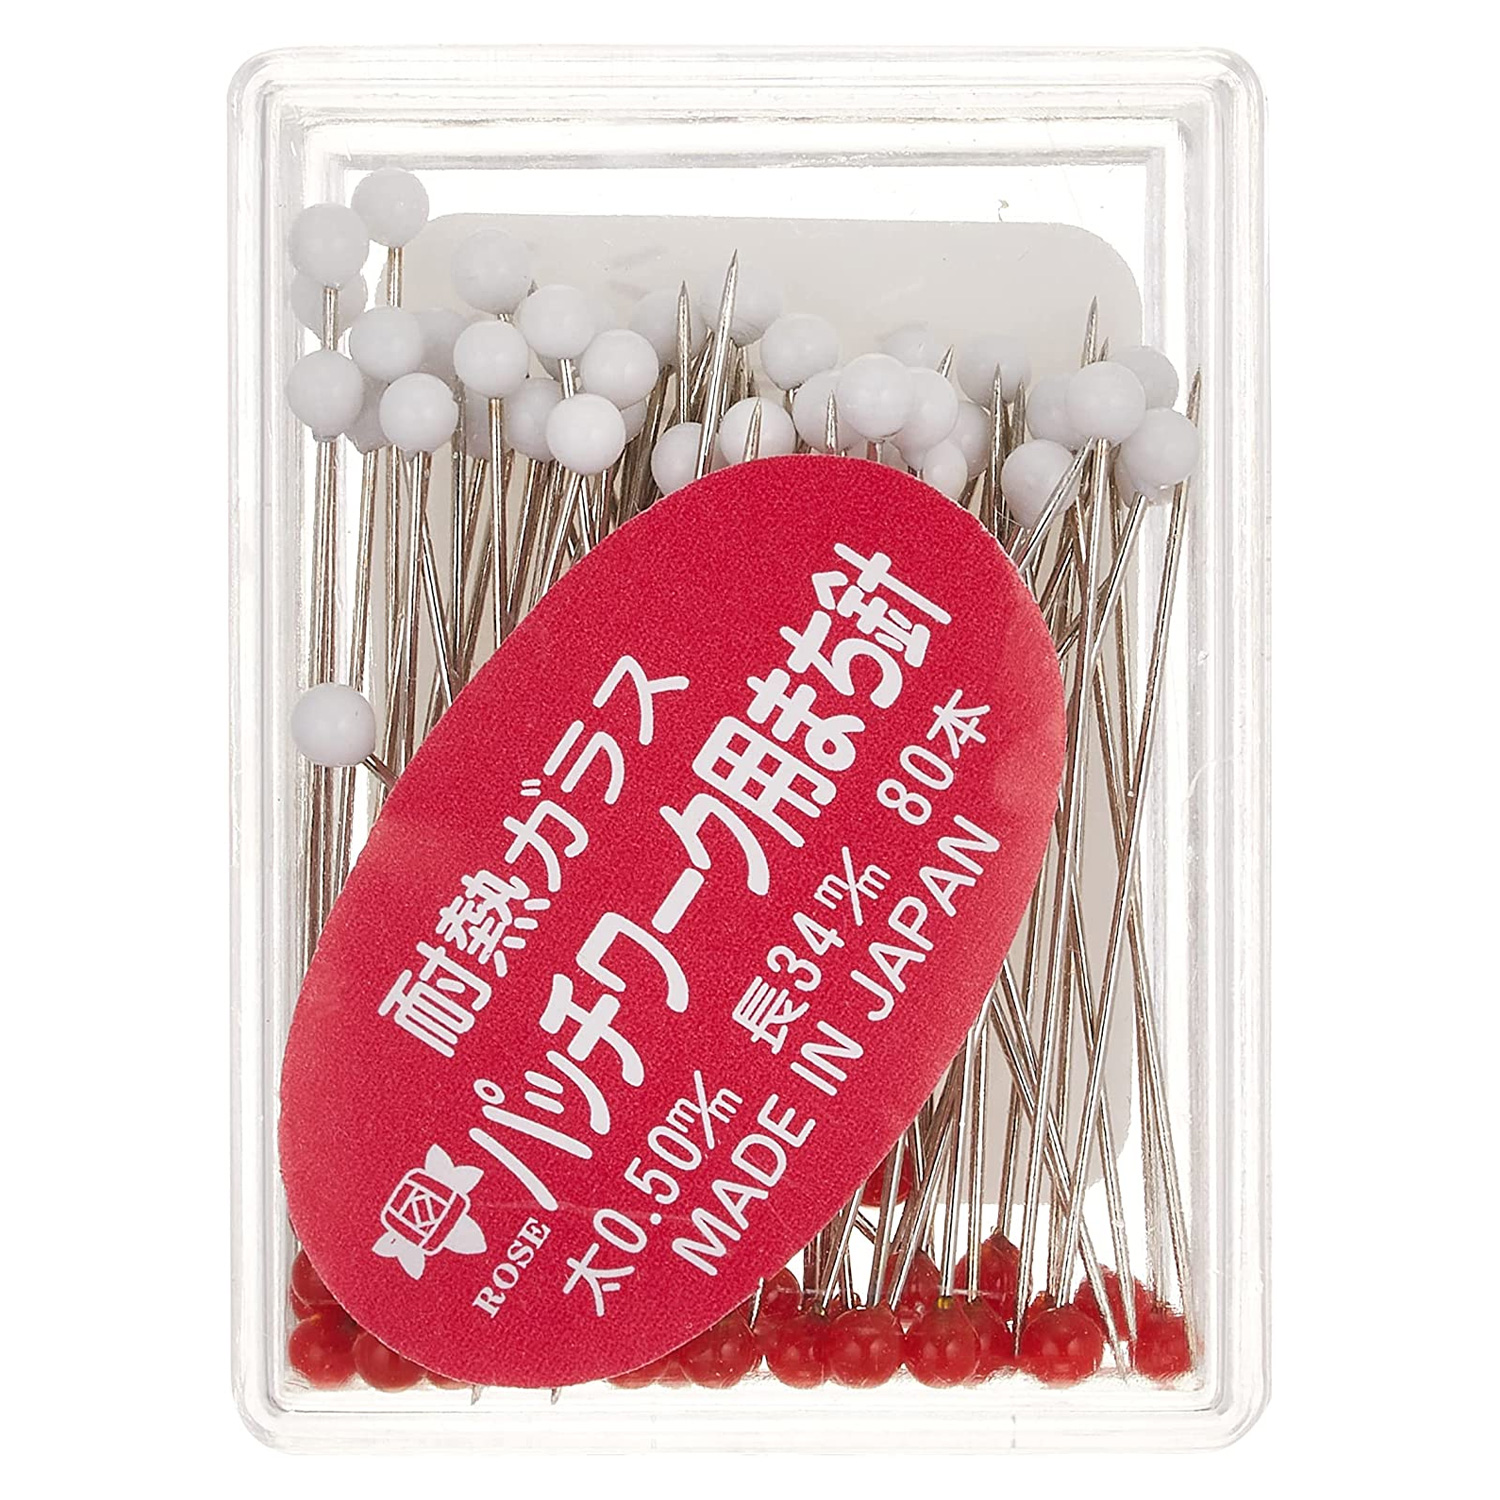 P3-1 Heat-Resisting Glass Ball Marking Pins for Patchwork, 80pcs (pcs)